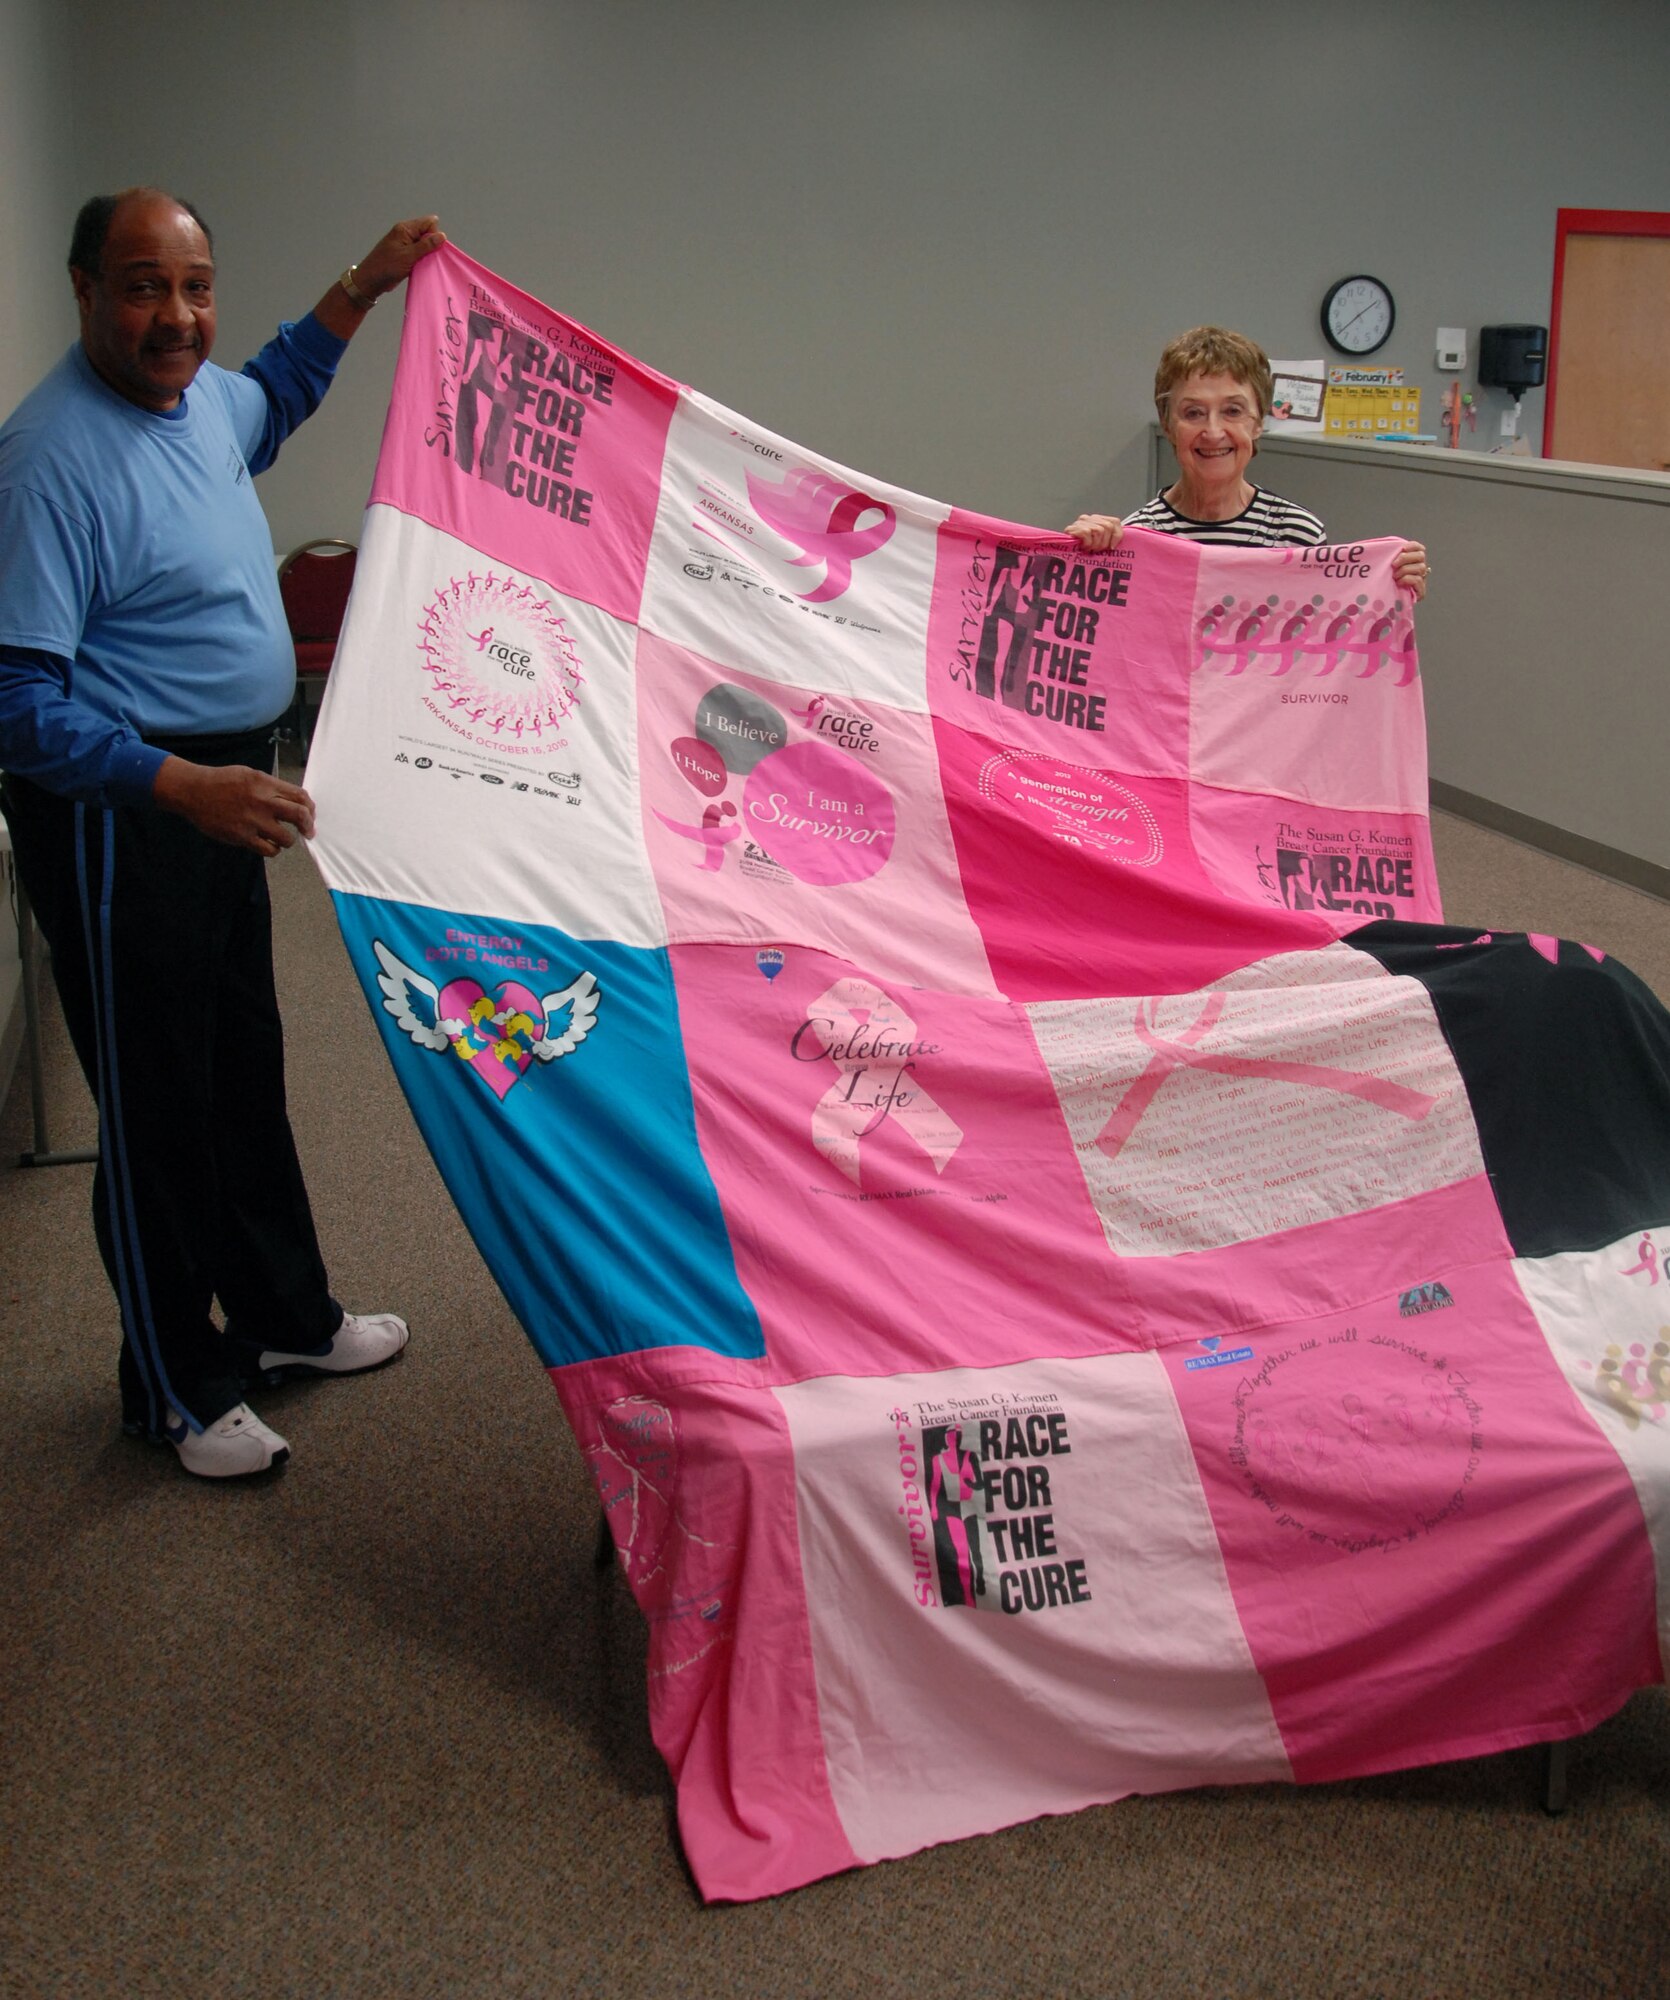 David Gayles, Air Force retiree and husband of the late Jean Gayles, and Pat Evans, retired school teacher, hold one of two blankets made from 11 Race for the Cure breast cancer shirts Feb. 27, 2013, at the Jacksonville Community Center. David Gayles requested Evans make the blankets to honor his wife’s wish. (Photo by Cheri Dragos-Pritchard)